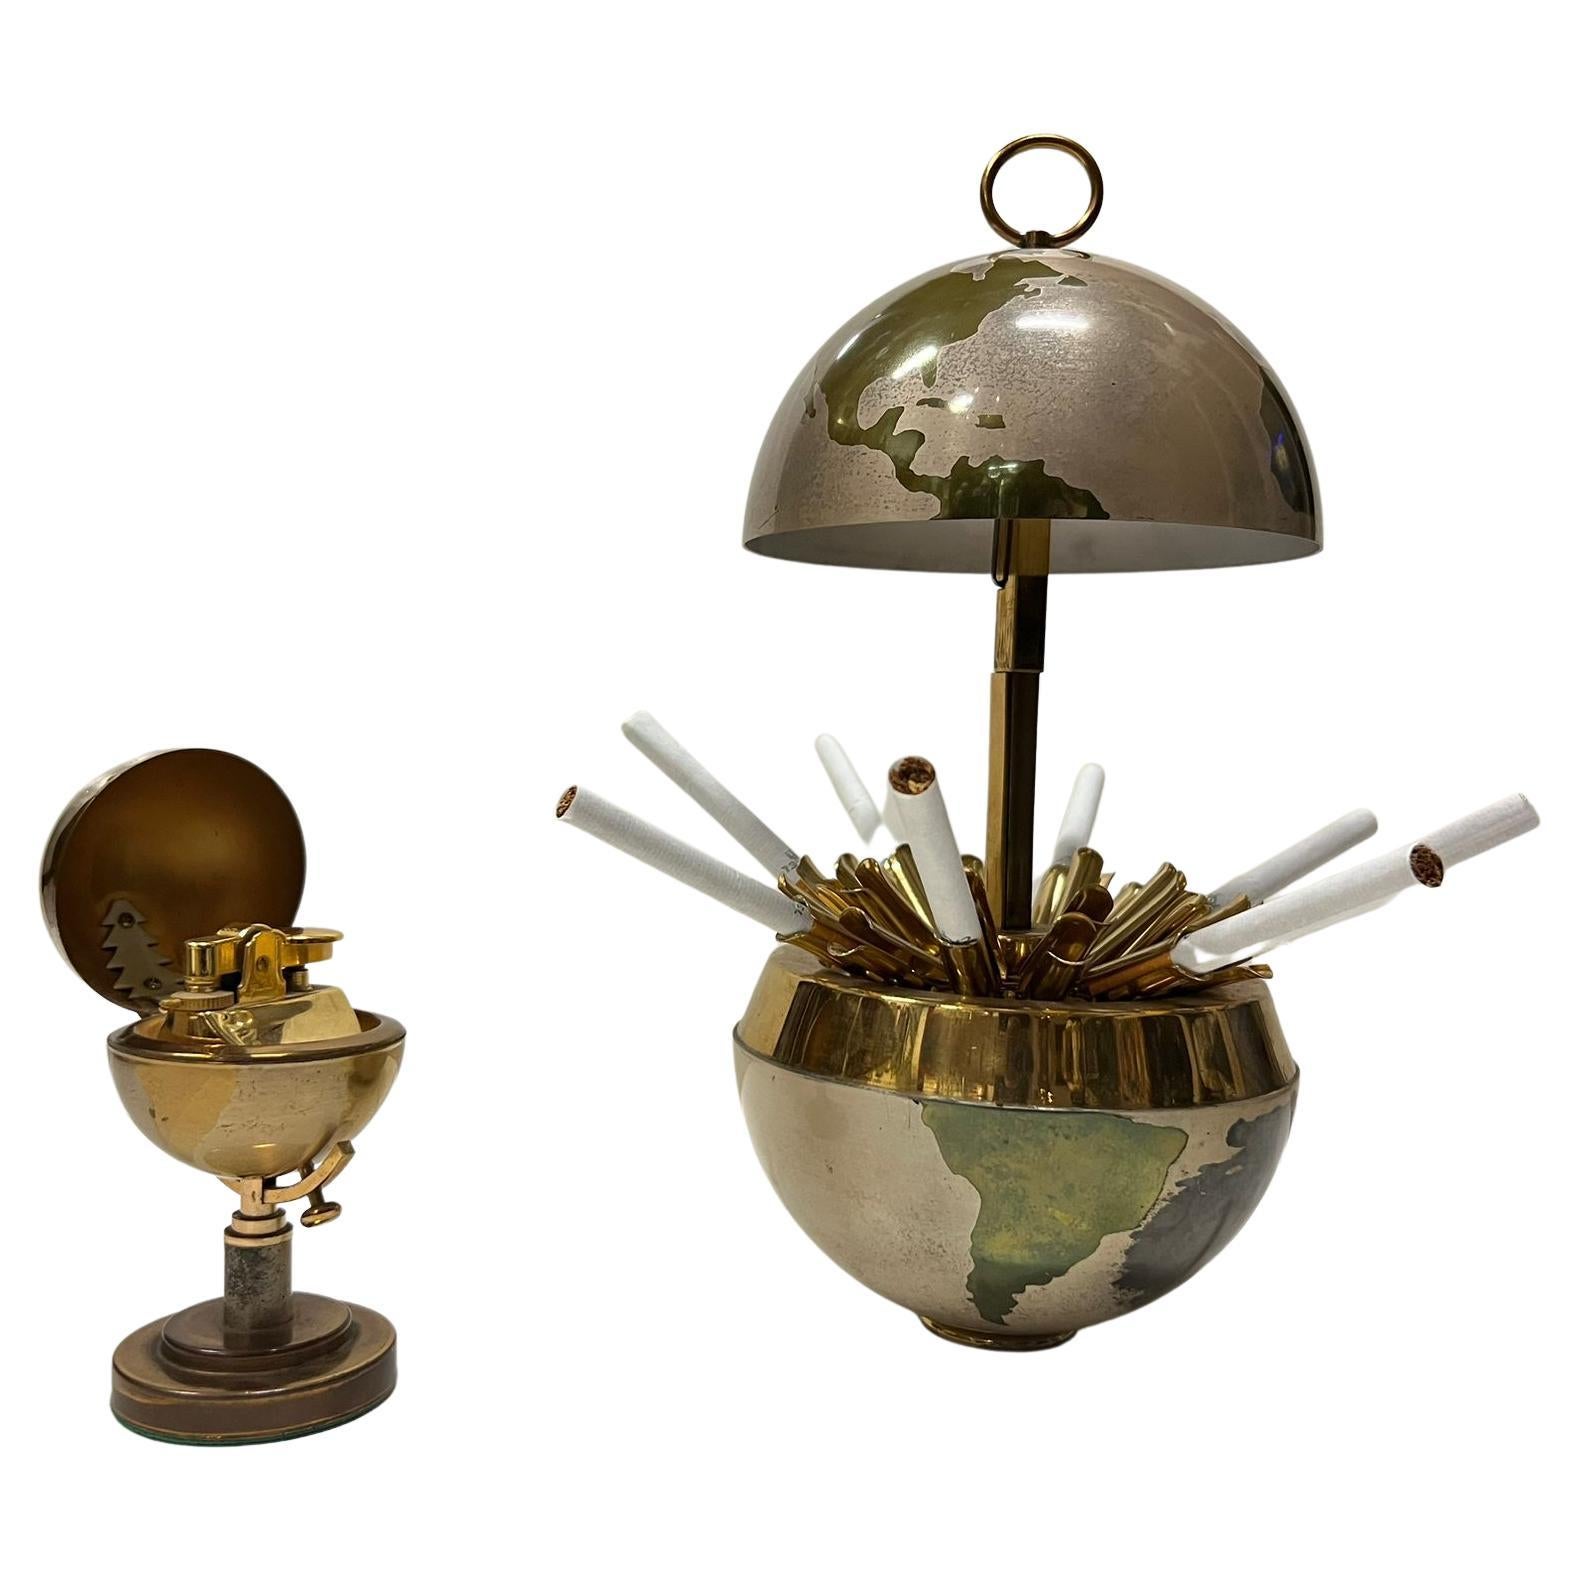 Globe cigarette dispenser with globe lighter, brass, Germany, 1950s, 

Defects on the cigarette dispenser:
a slight dent
in two places the paint is rubbed off due to use (see the last photo).

